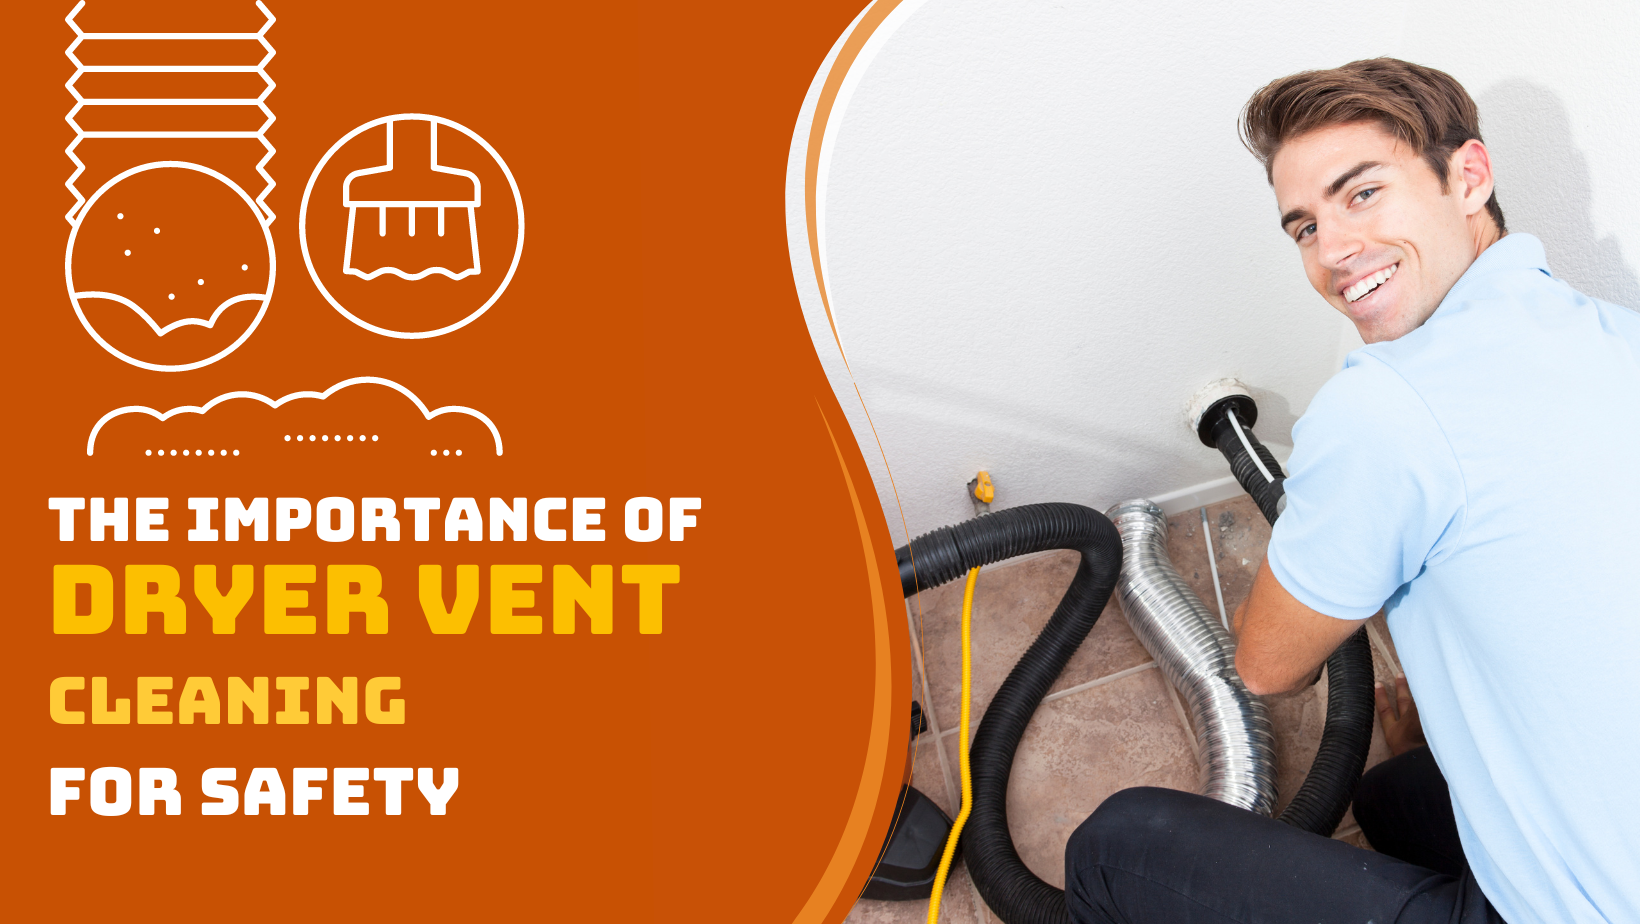 The importance of dryer vent cleaning